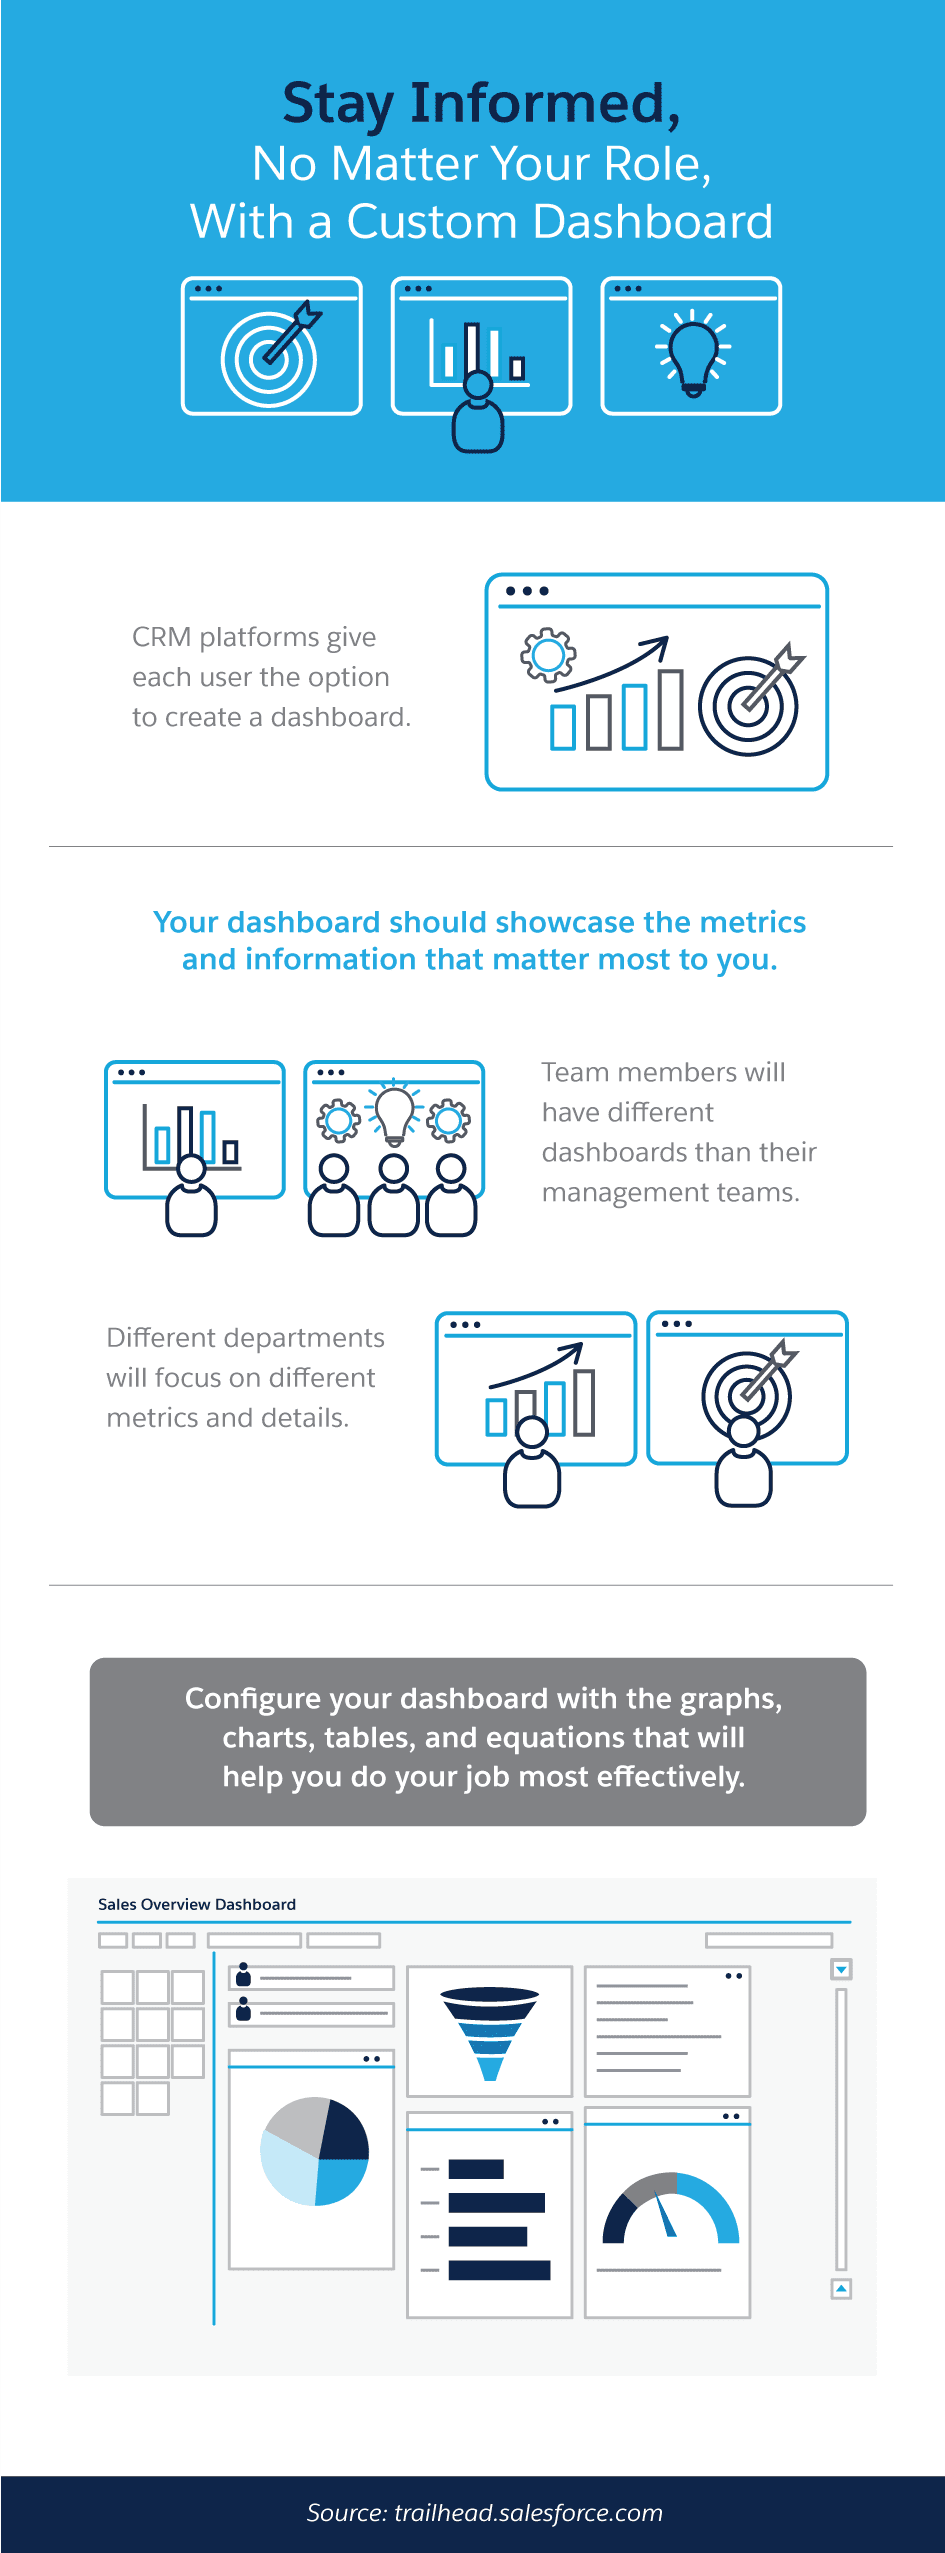 Stay Informed, No Matter Your Role With a Custom Dashboard